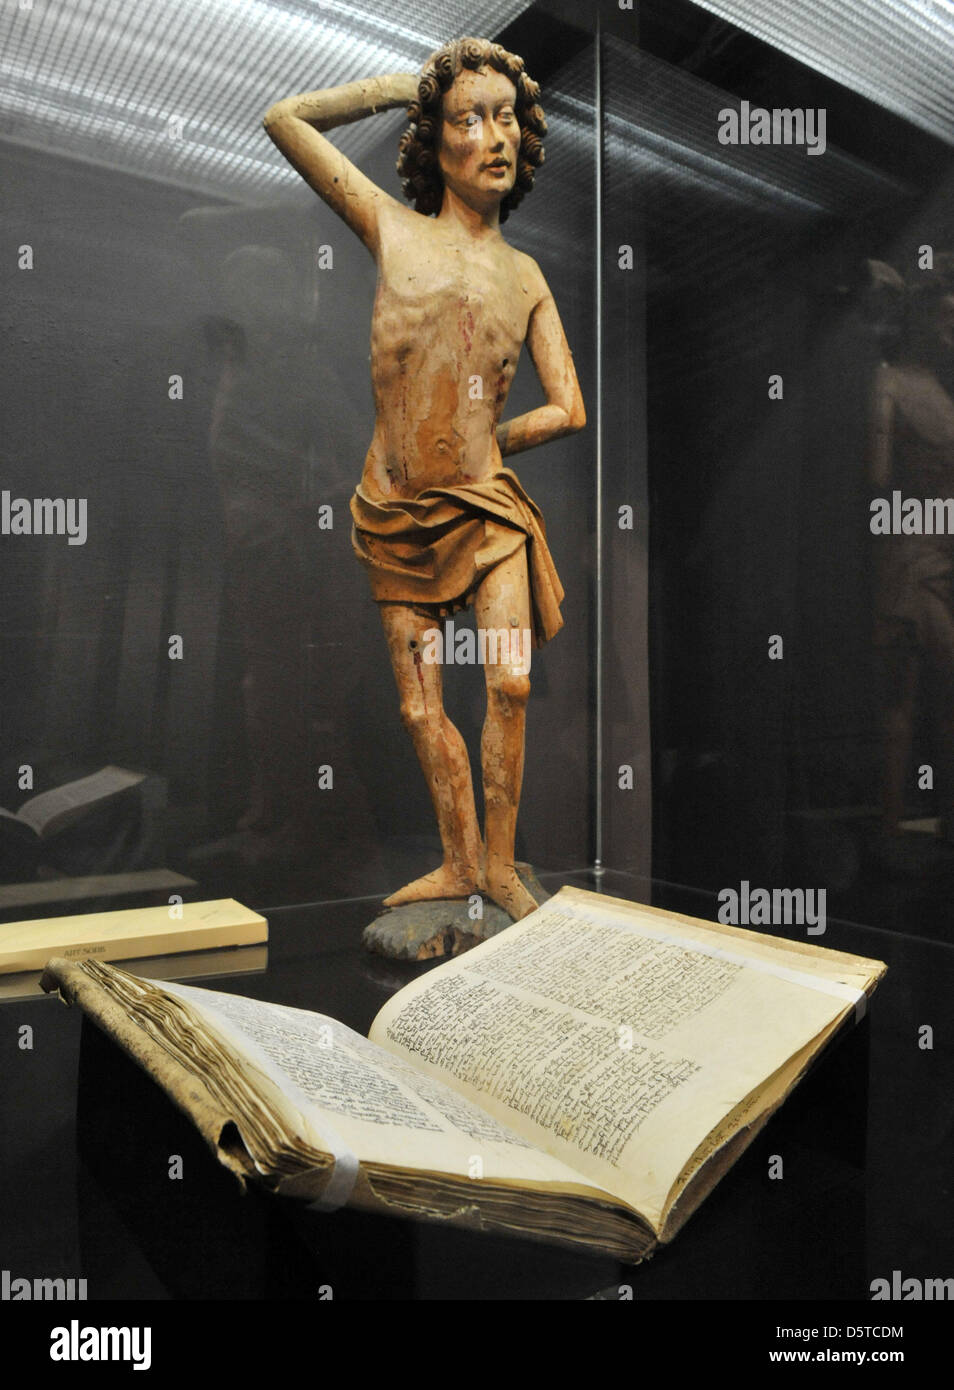 A medical manuscript and a fragment of a statue of Saint Sebastian are on display at the Museum for Thuringian Regional Studies in Erfurt, Germany, 21 November 2012. An exhibition of the precious collection of manuscripts of scholar  Amplonius Rating de Berka (around 1365 - 1435) will take place from 24 November 2012 til 01 April 2013. The Bibliotheca Amploniana is considered the b Stock Photo